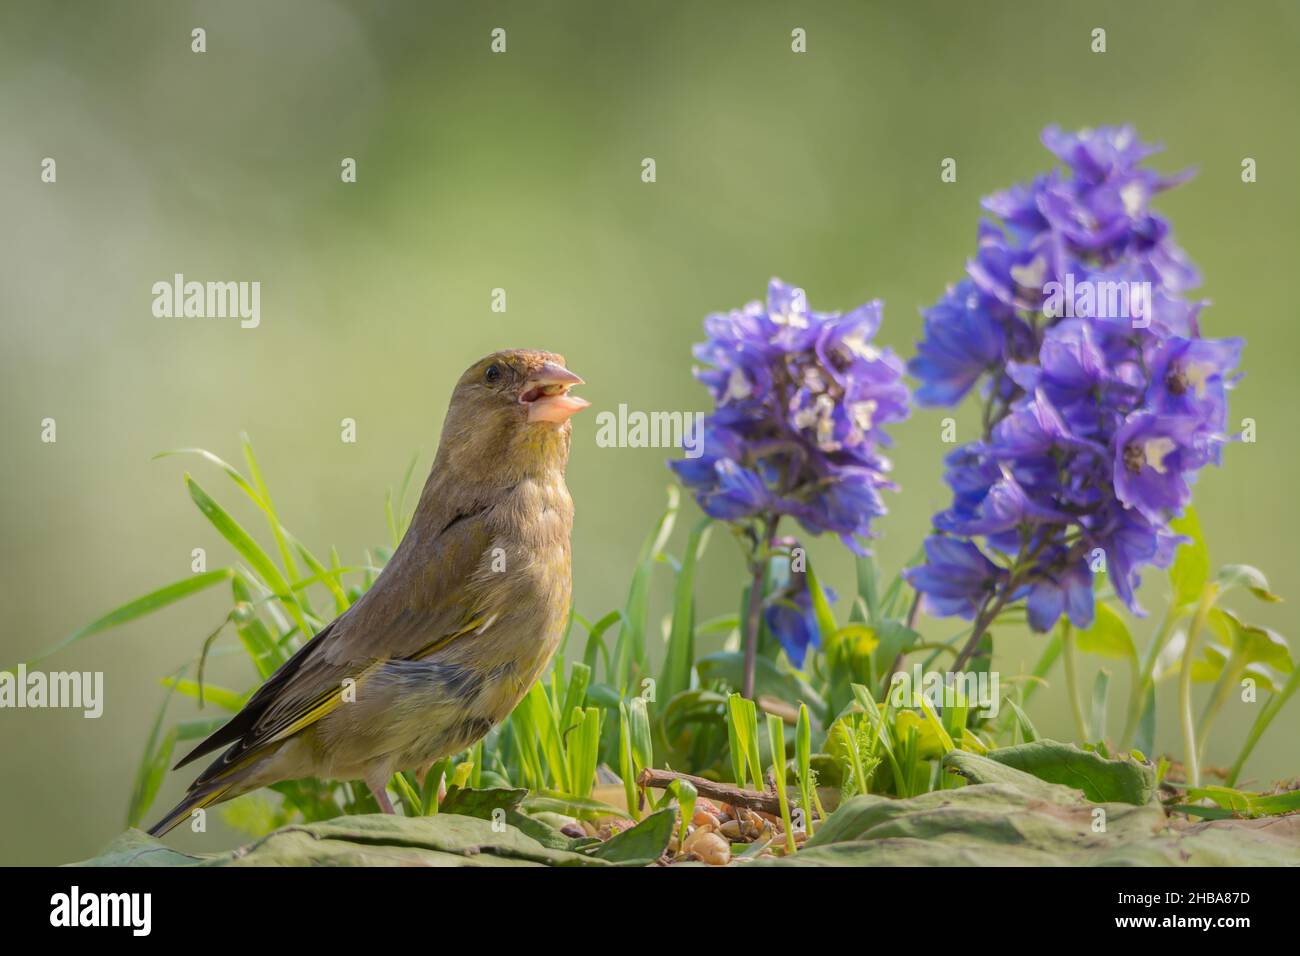 greenfinch is standing in front of flowers Stock Photo